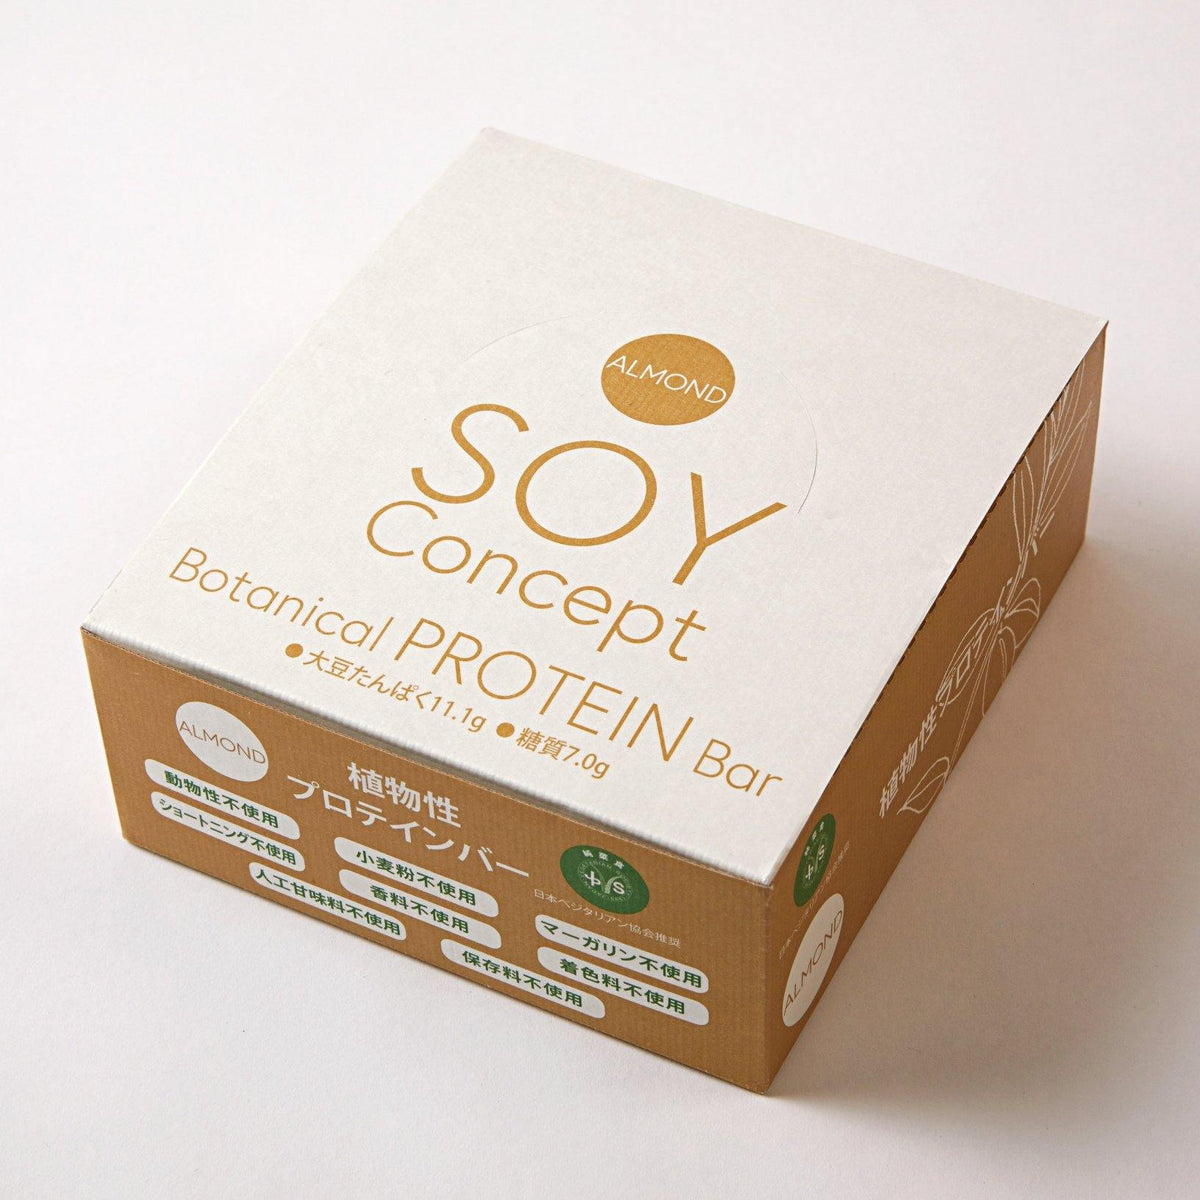 SOY Concept Almond アーモンド（1箱12本） - Wellness Tree